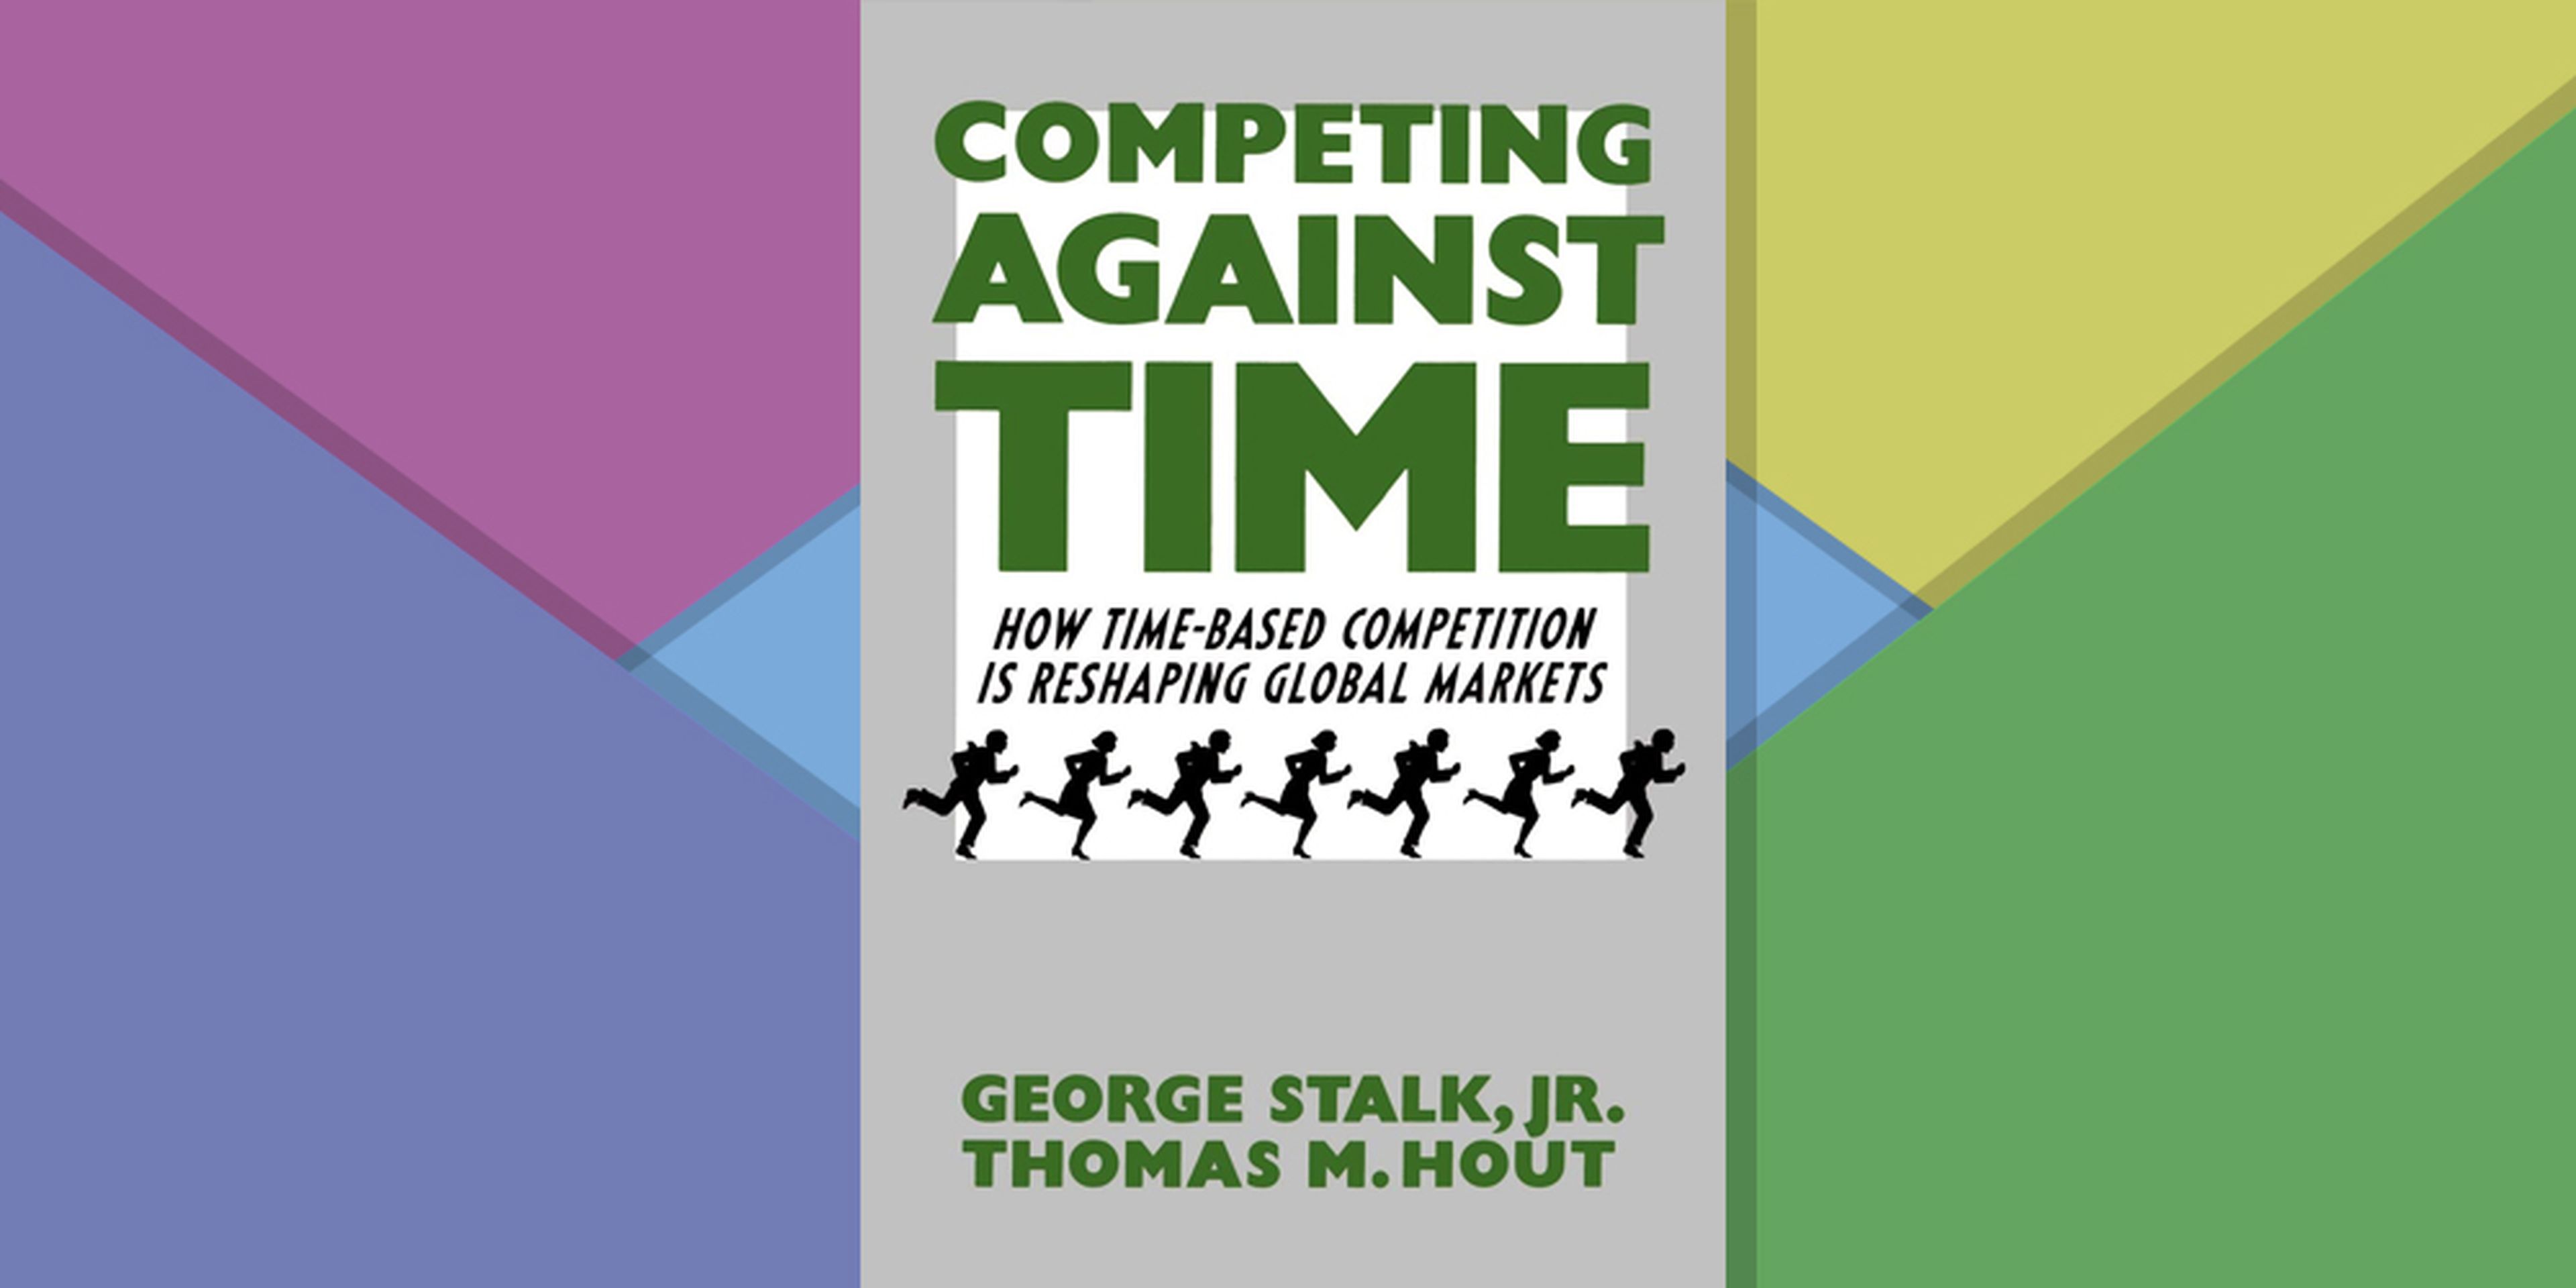 Tim Cook: "Competing Against Time"